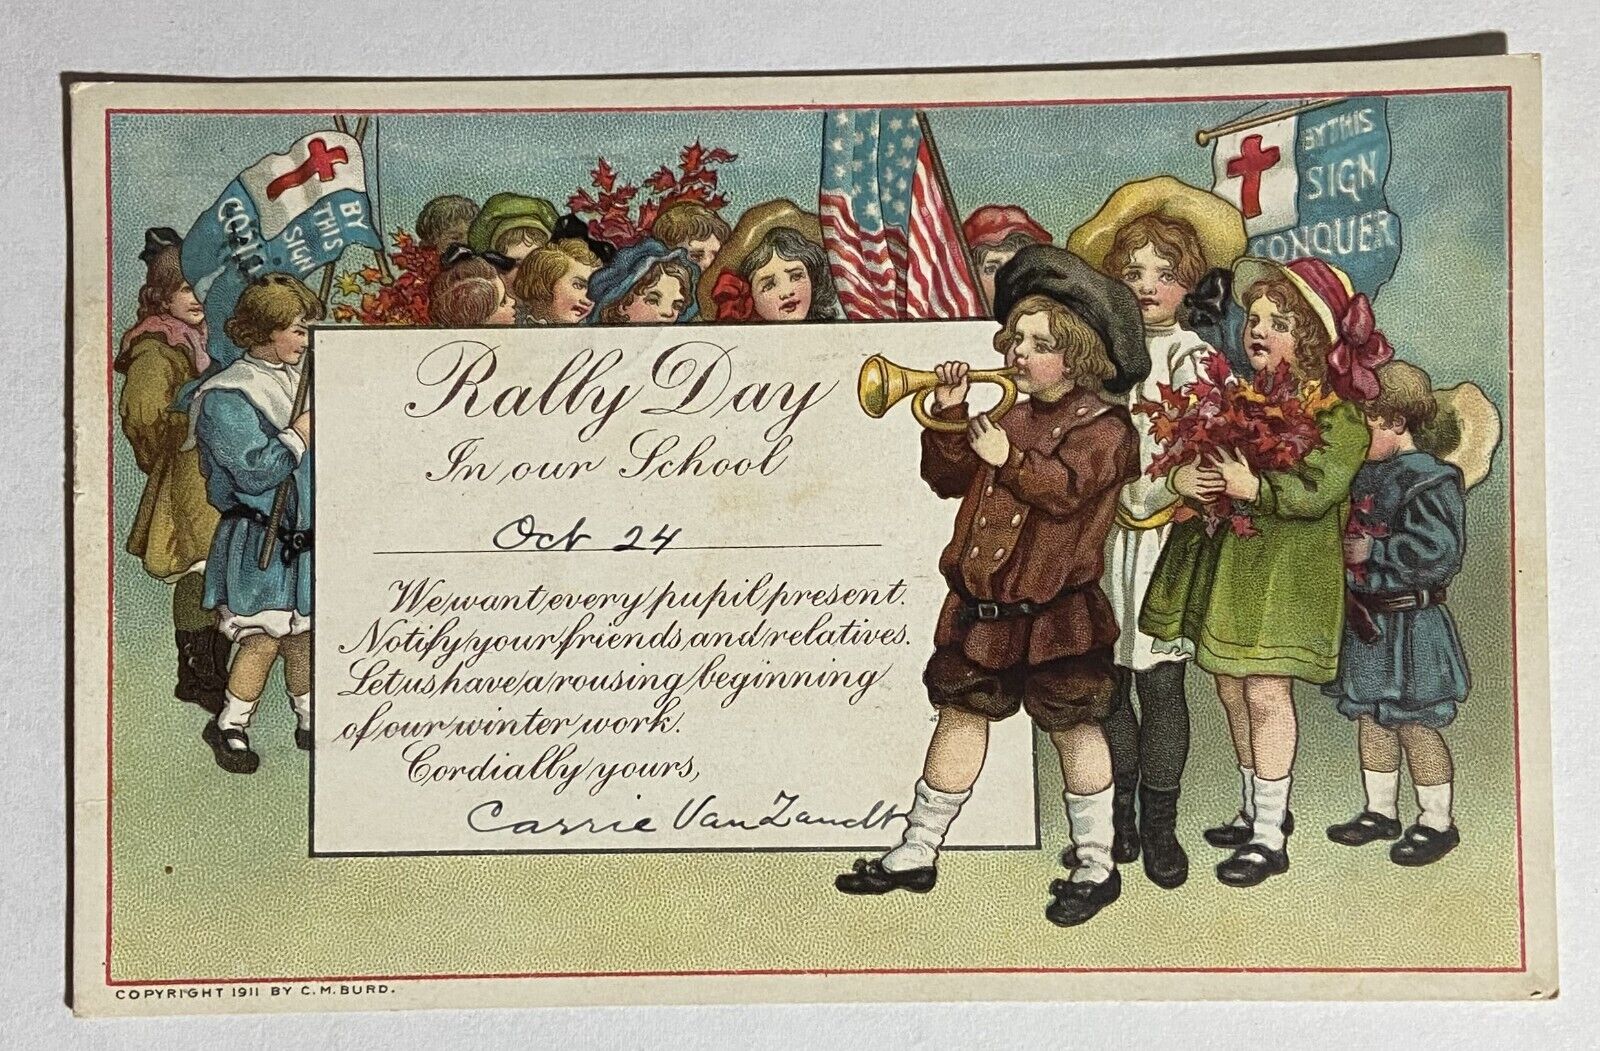 1915 Old Antique Postcard Patriotic WWI or School Rally Day Oakland City Indiana